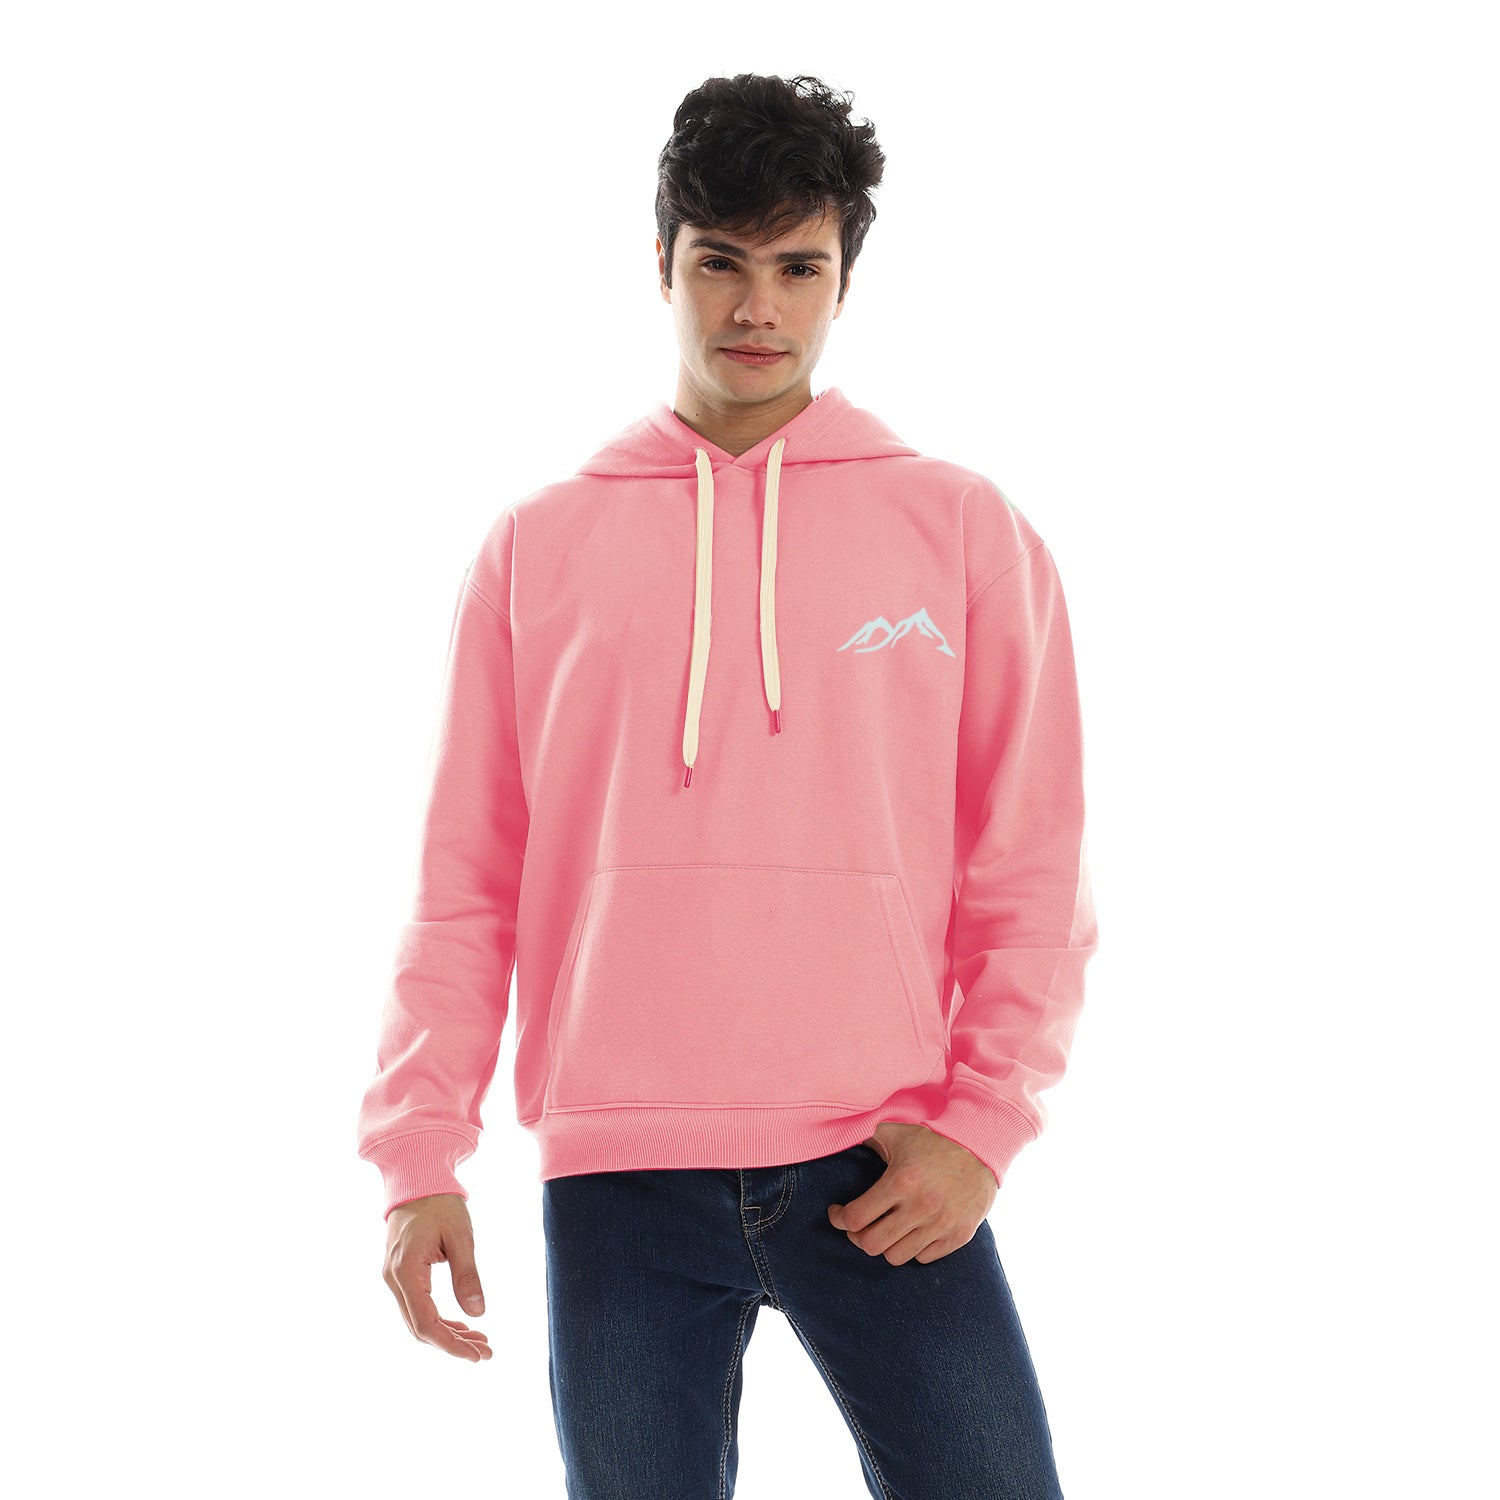 Cold Mountain Unisex Oversized Hoodie - Rose